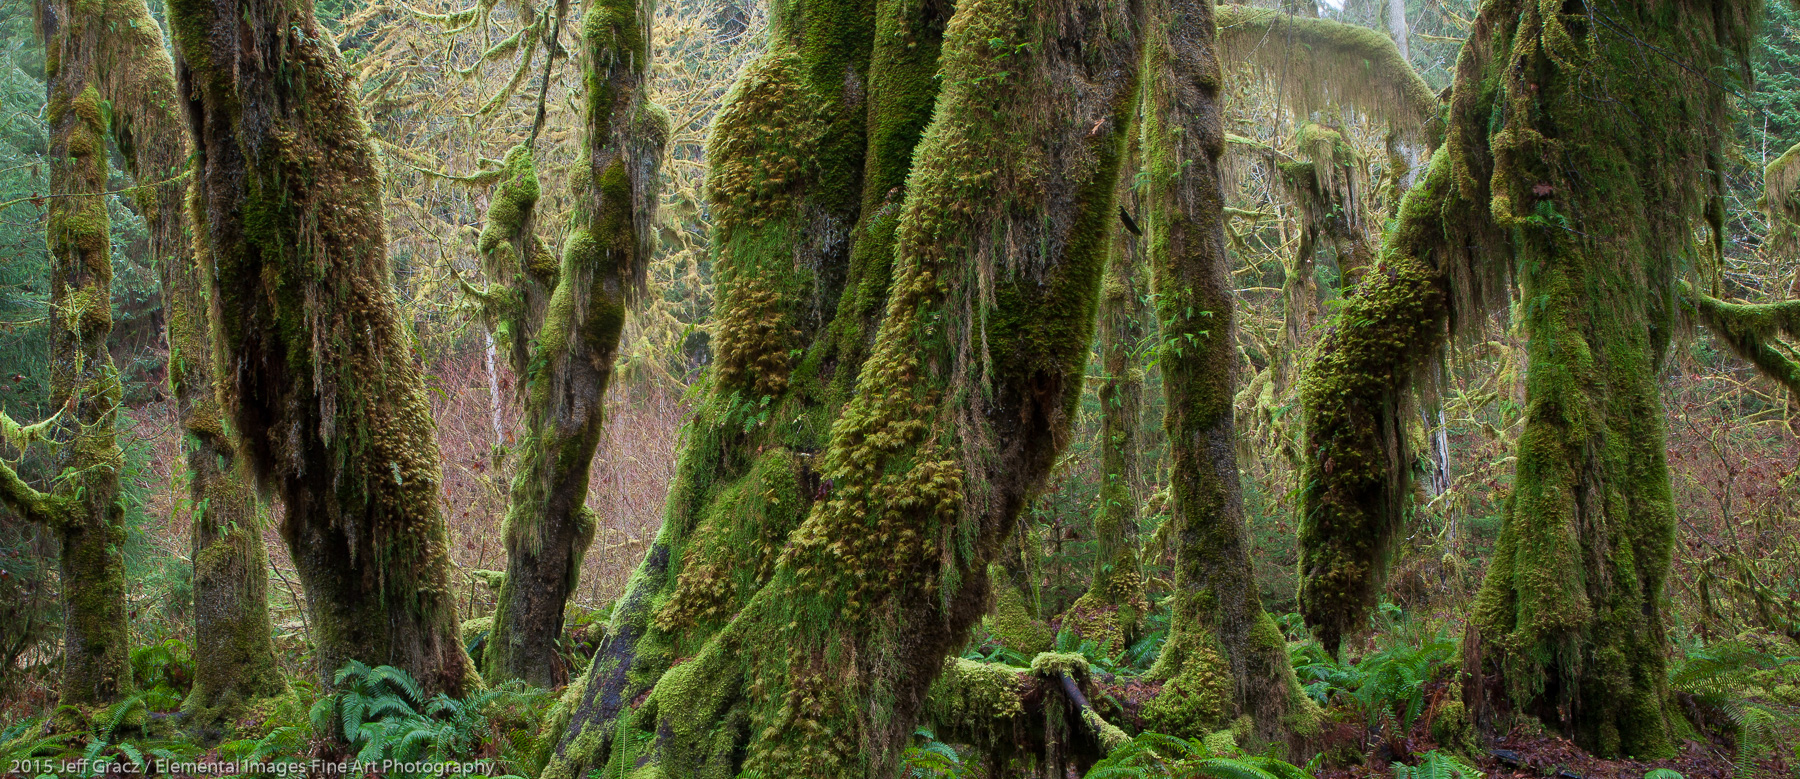 Hall of Mosses II | Olympic National Park | WA | USA - © 2015 Jeff Gracz / Elemental Images Fine Art Photography - All Rights Reserved Worldwide